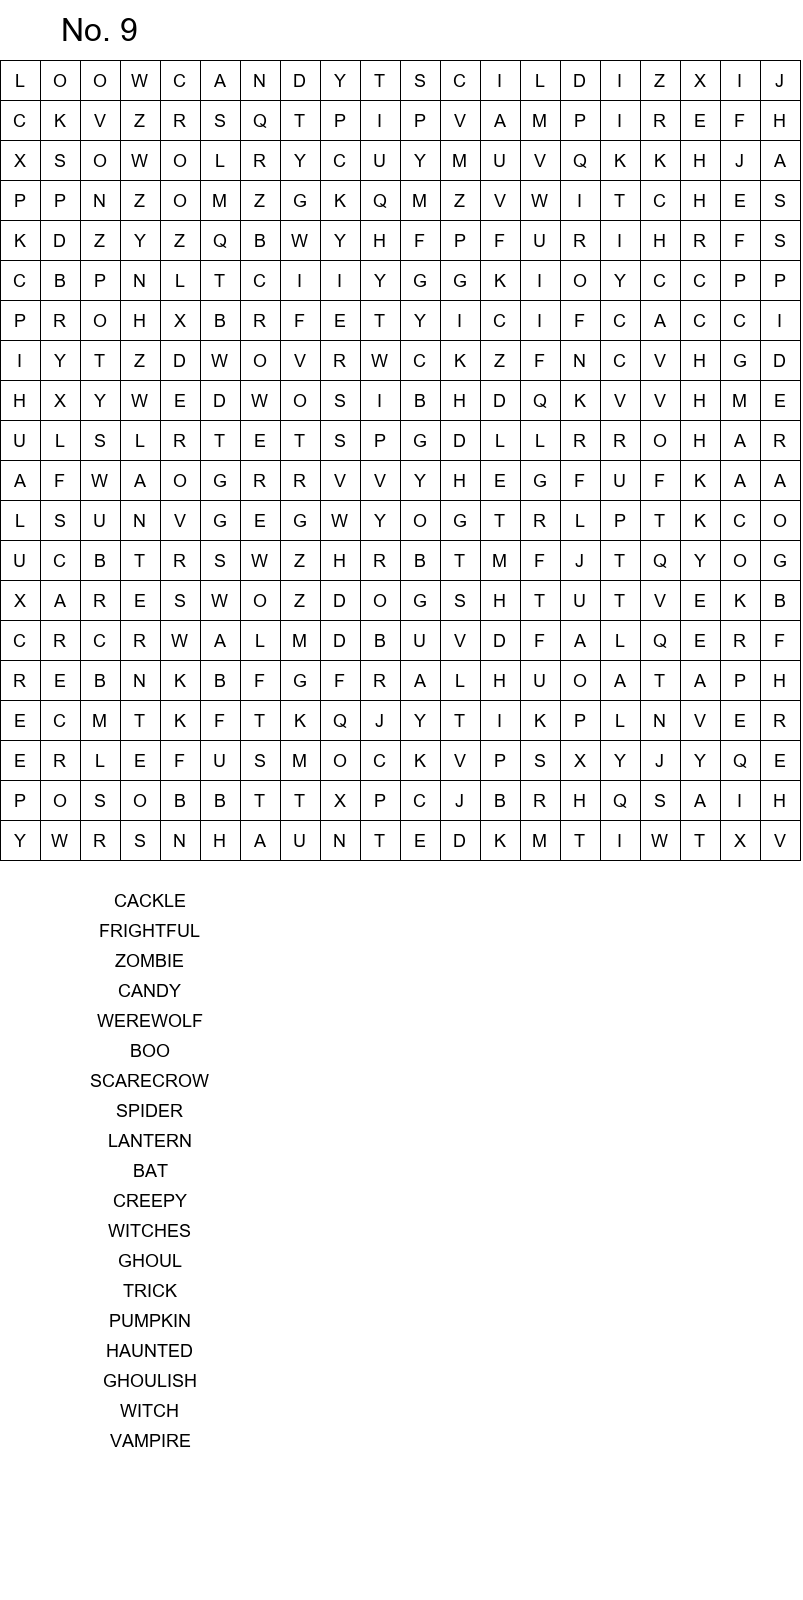 Halloween word search for middle school size 20x20 No 9